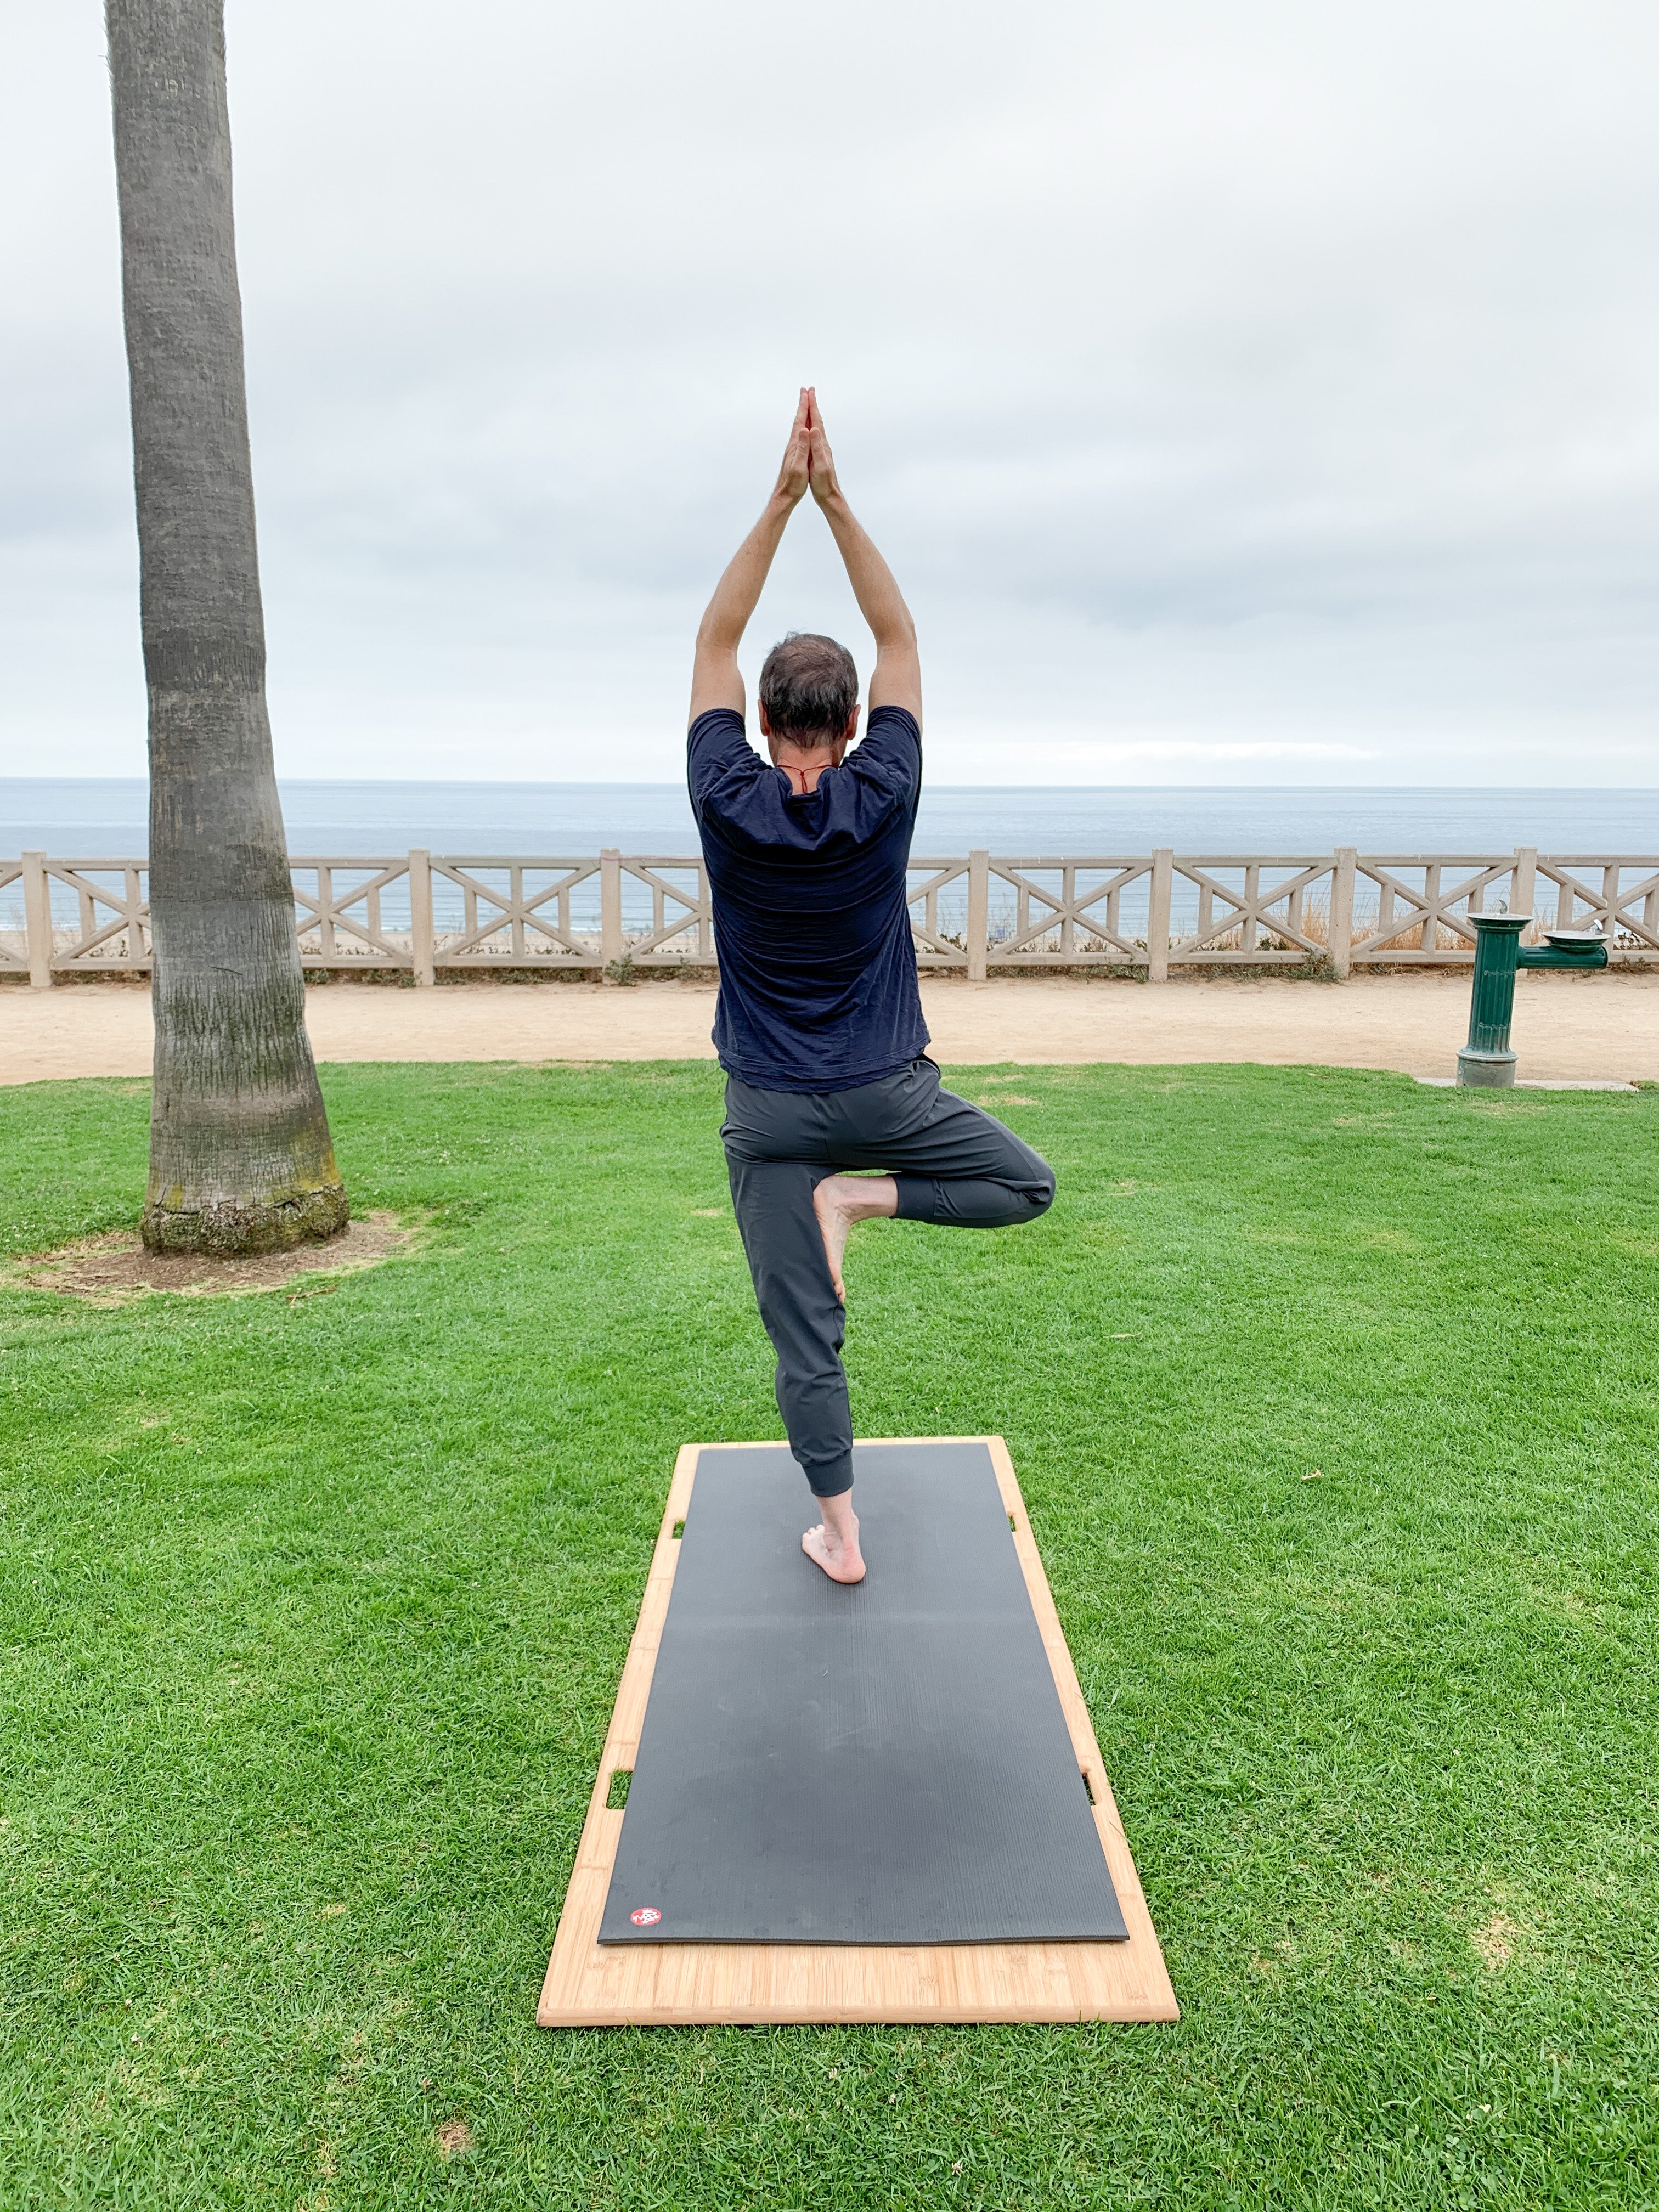 man in tree pose using Root Board on park grass overlooking ocean